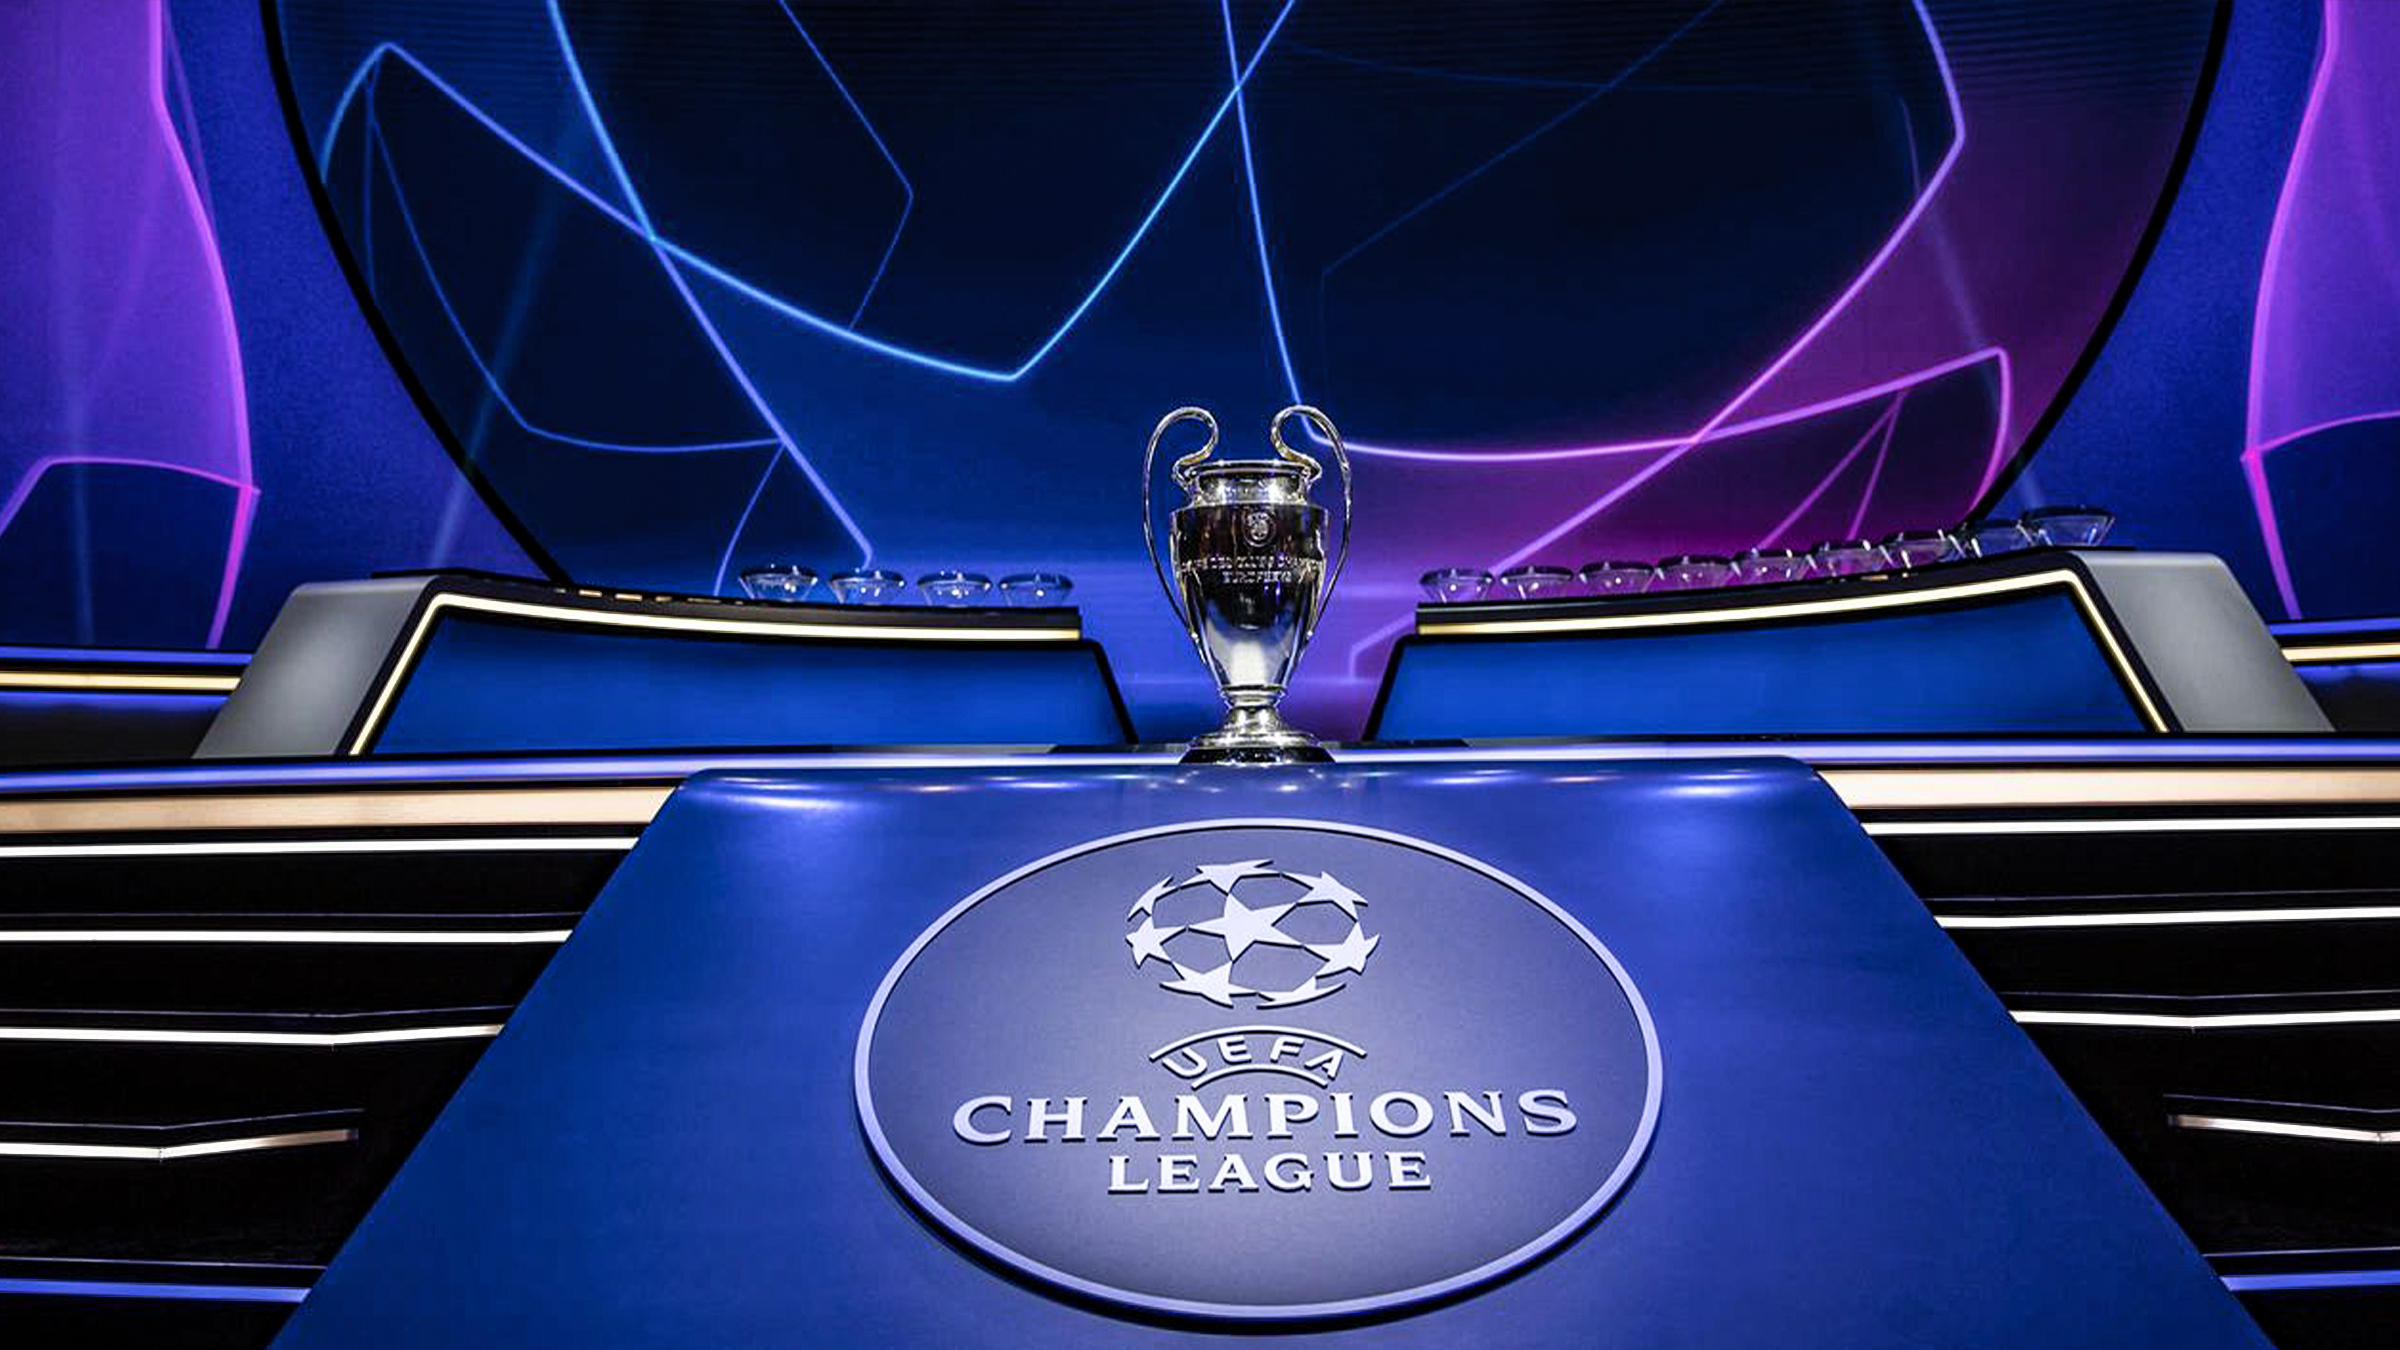 Welcome back, Champions League!